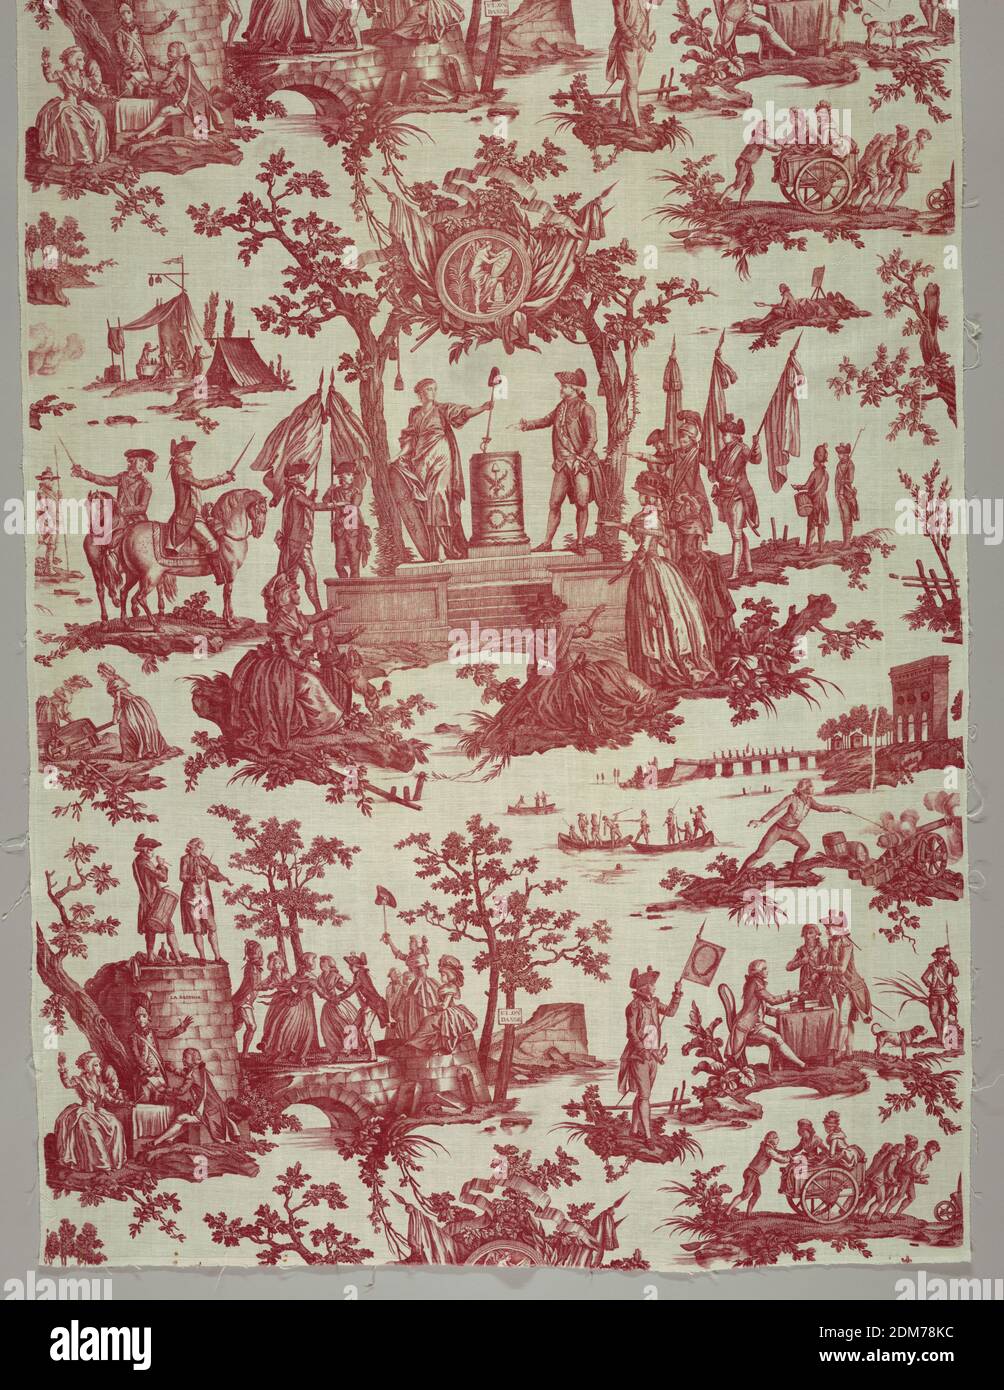 La Fete de la Federation (The Festival of the Federation), Jean-Baptiste Marie Huet, (French, 1745–1811), Oberkampf & Cie., (Jouy-en-Josas, France, 1759–1815), Medium: cotton Technique: printed by engraved plate on plain weave, Length of printed cotton with scenes printed in red on white. In one scene, Louis XVI is shown taking the oath of loyalty at the Altar of Liberty while Marie Antoinette and the Dauphin pledge allegiance; Lafayette is in the background. In another scene people are dancing on the ruins of the Bastille. The fabric was designed after the fall of the Bastille Stock Photo